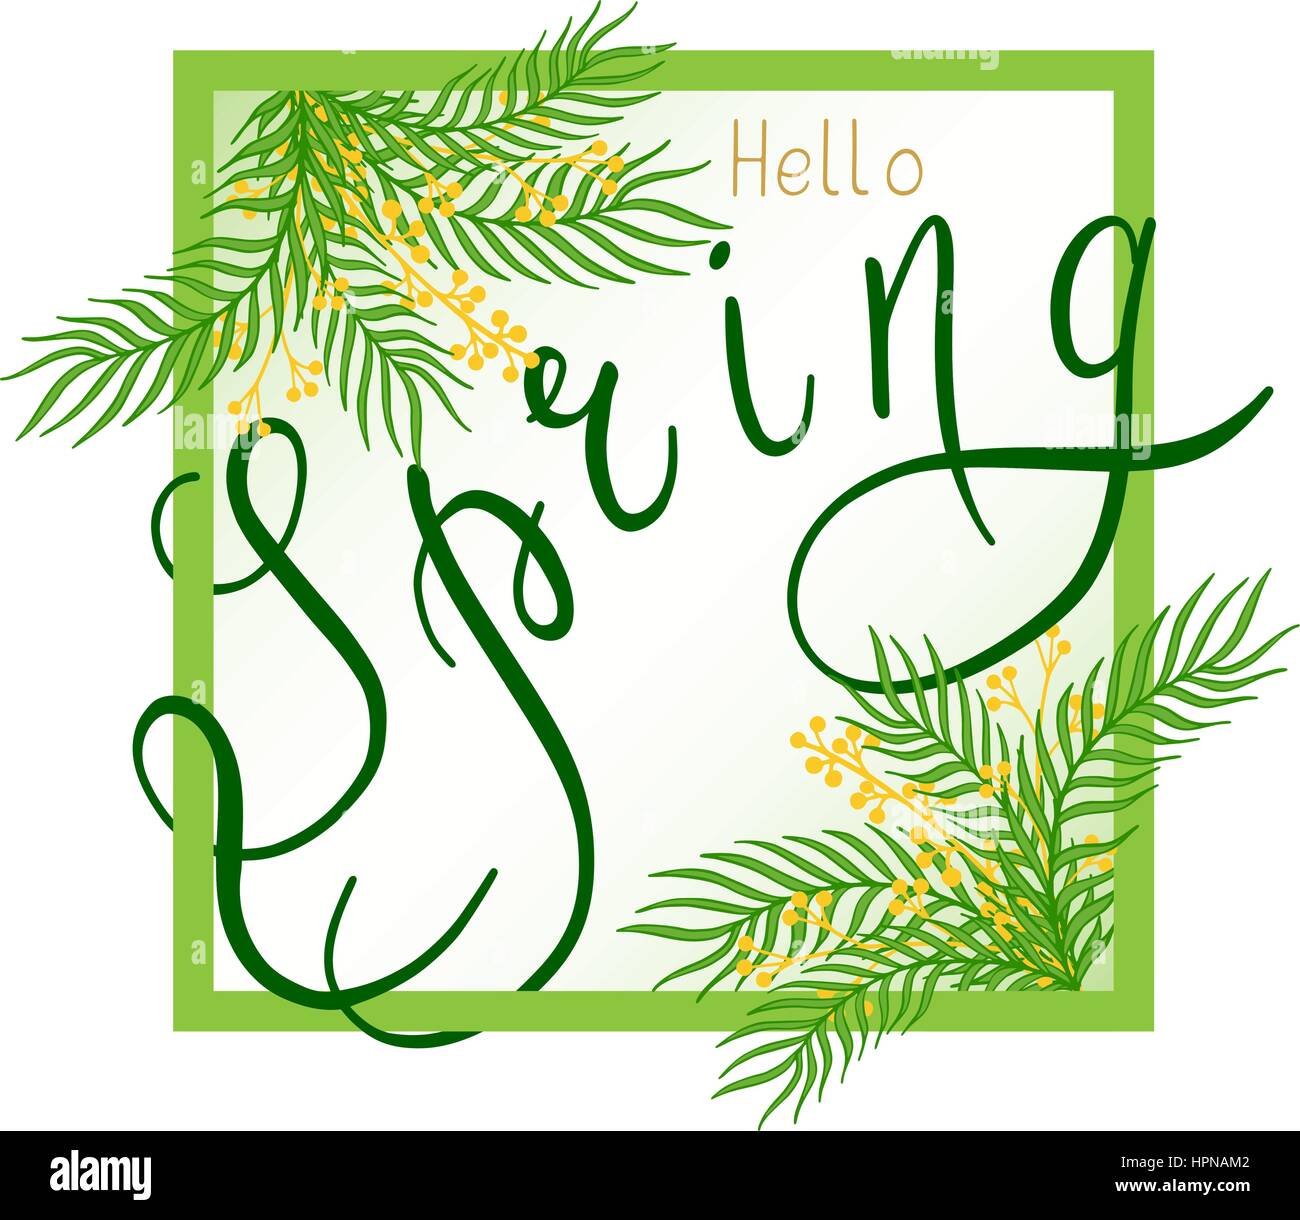 Spring illustration with handwritten text, leaves and branches. Stock Vector